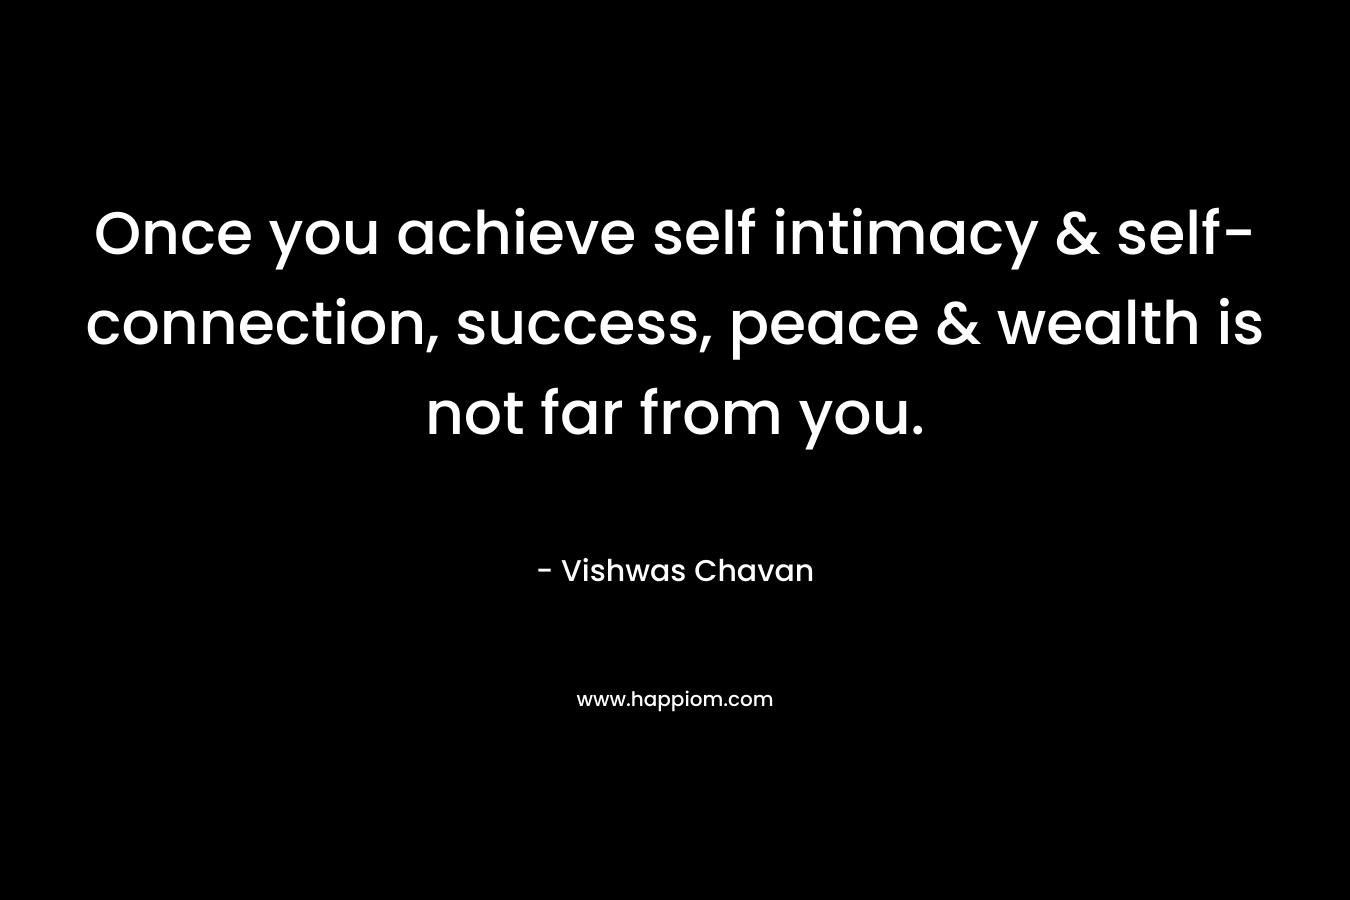 Once you achieve self intimacy & self-connection, success, peace & wealth is not far from you.